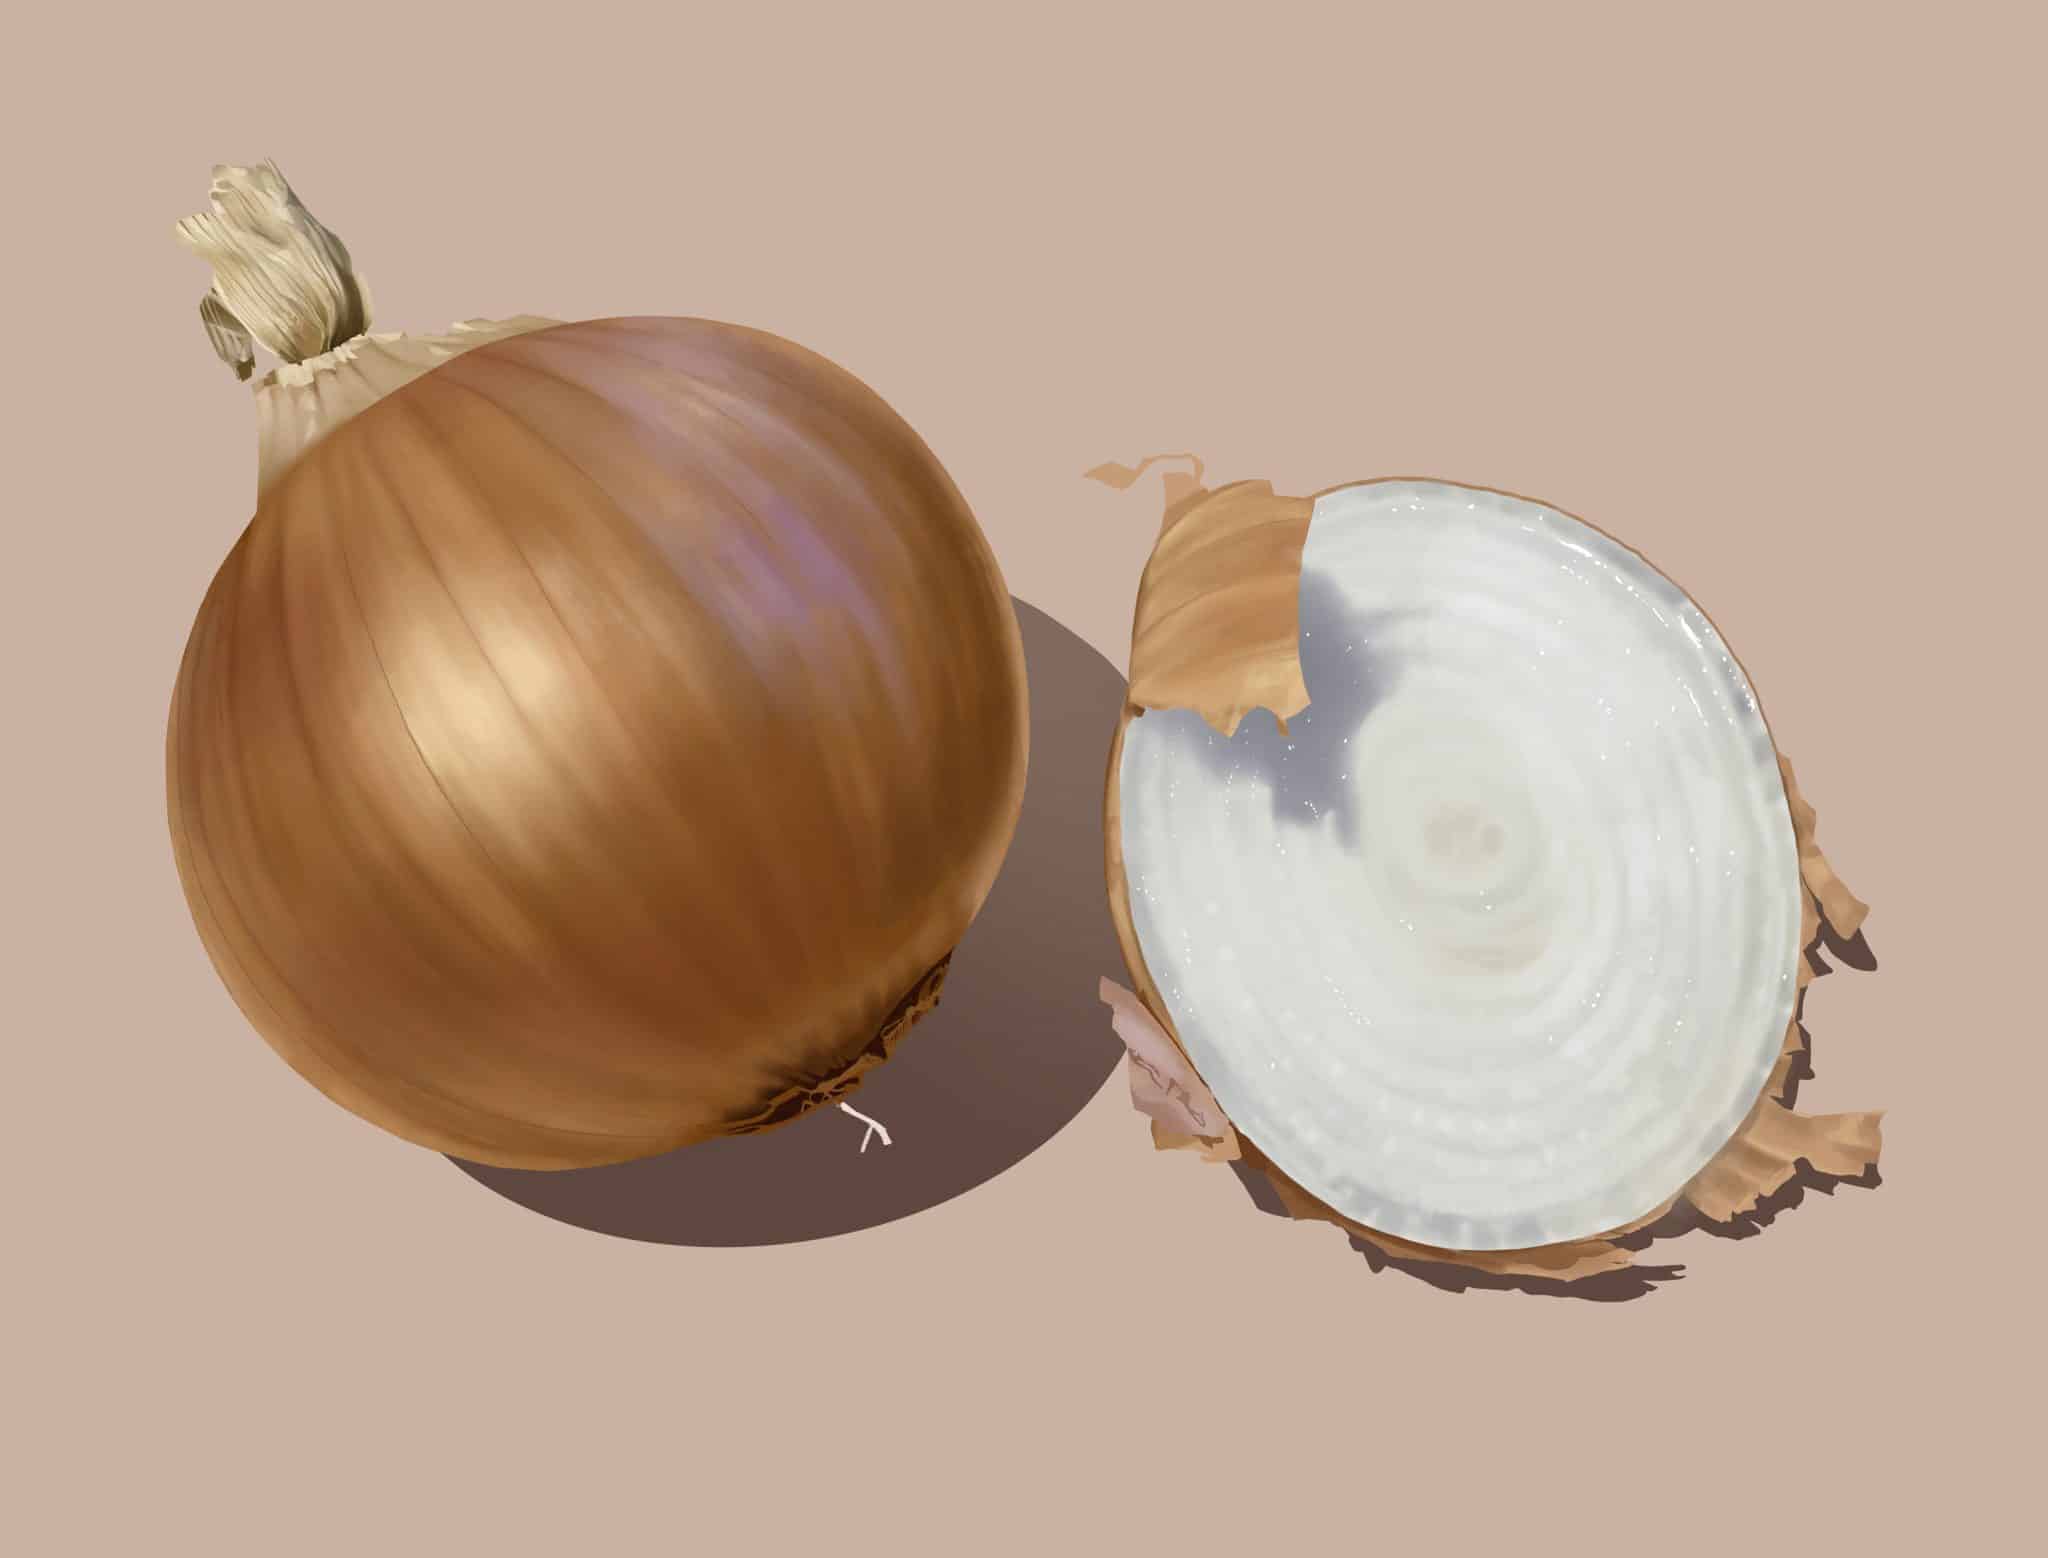 onion drawing by staceyincolour on DeviantArt